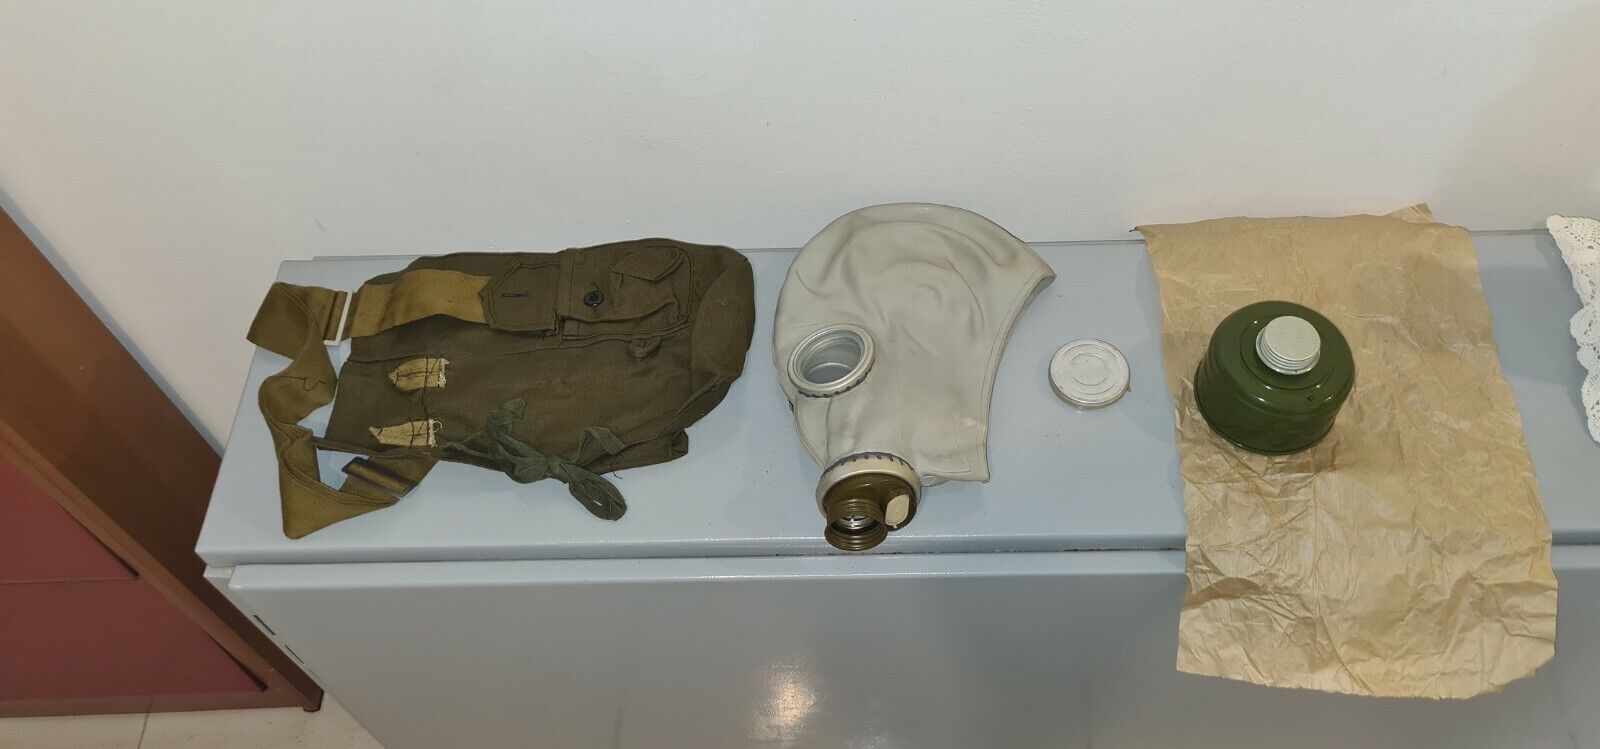 2 Gas Mask GP-5 Russian - Soviet - USSR Army - full set - all sizes